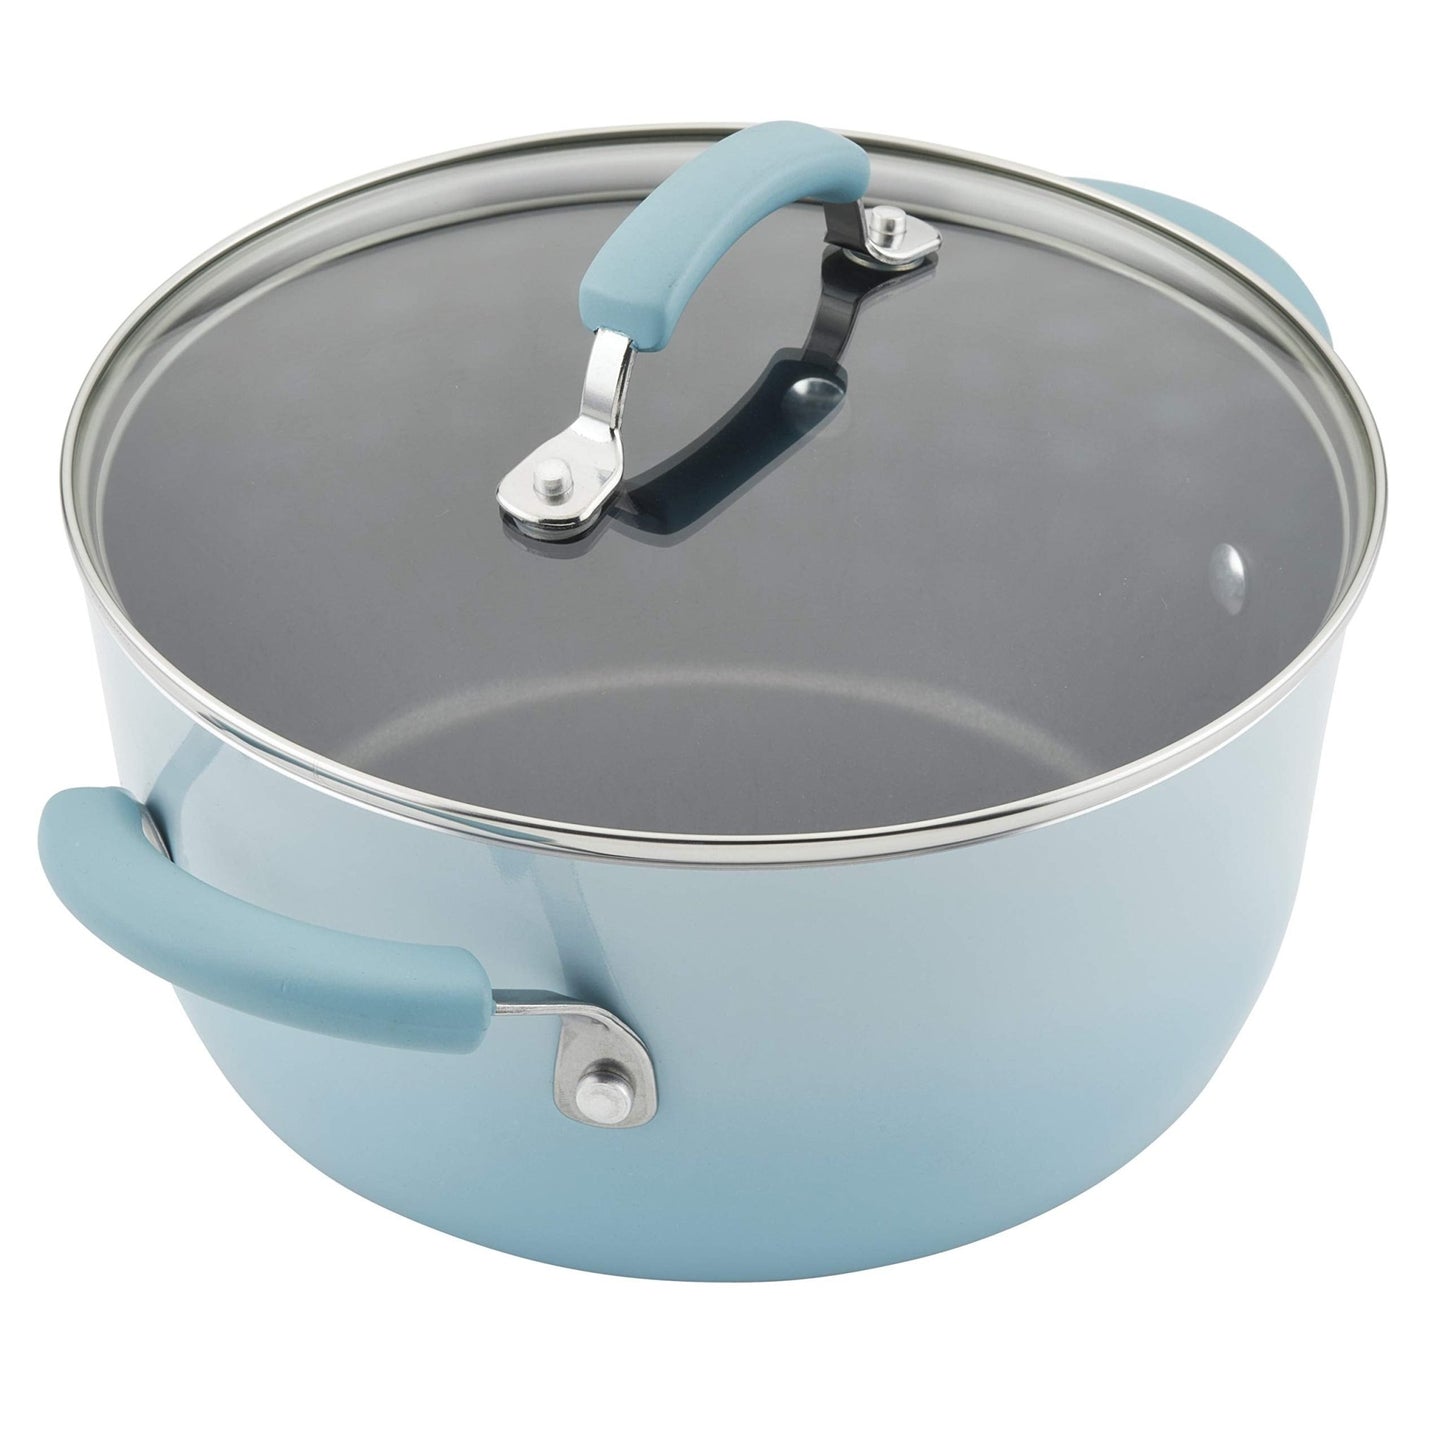 Rachael Ray-Rachael Ray Brights Nonstick Cookware Pots and Pans Set with LocknLock Containers, 19 Piece, Sky Blue - Brandat Outlet